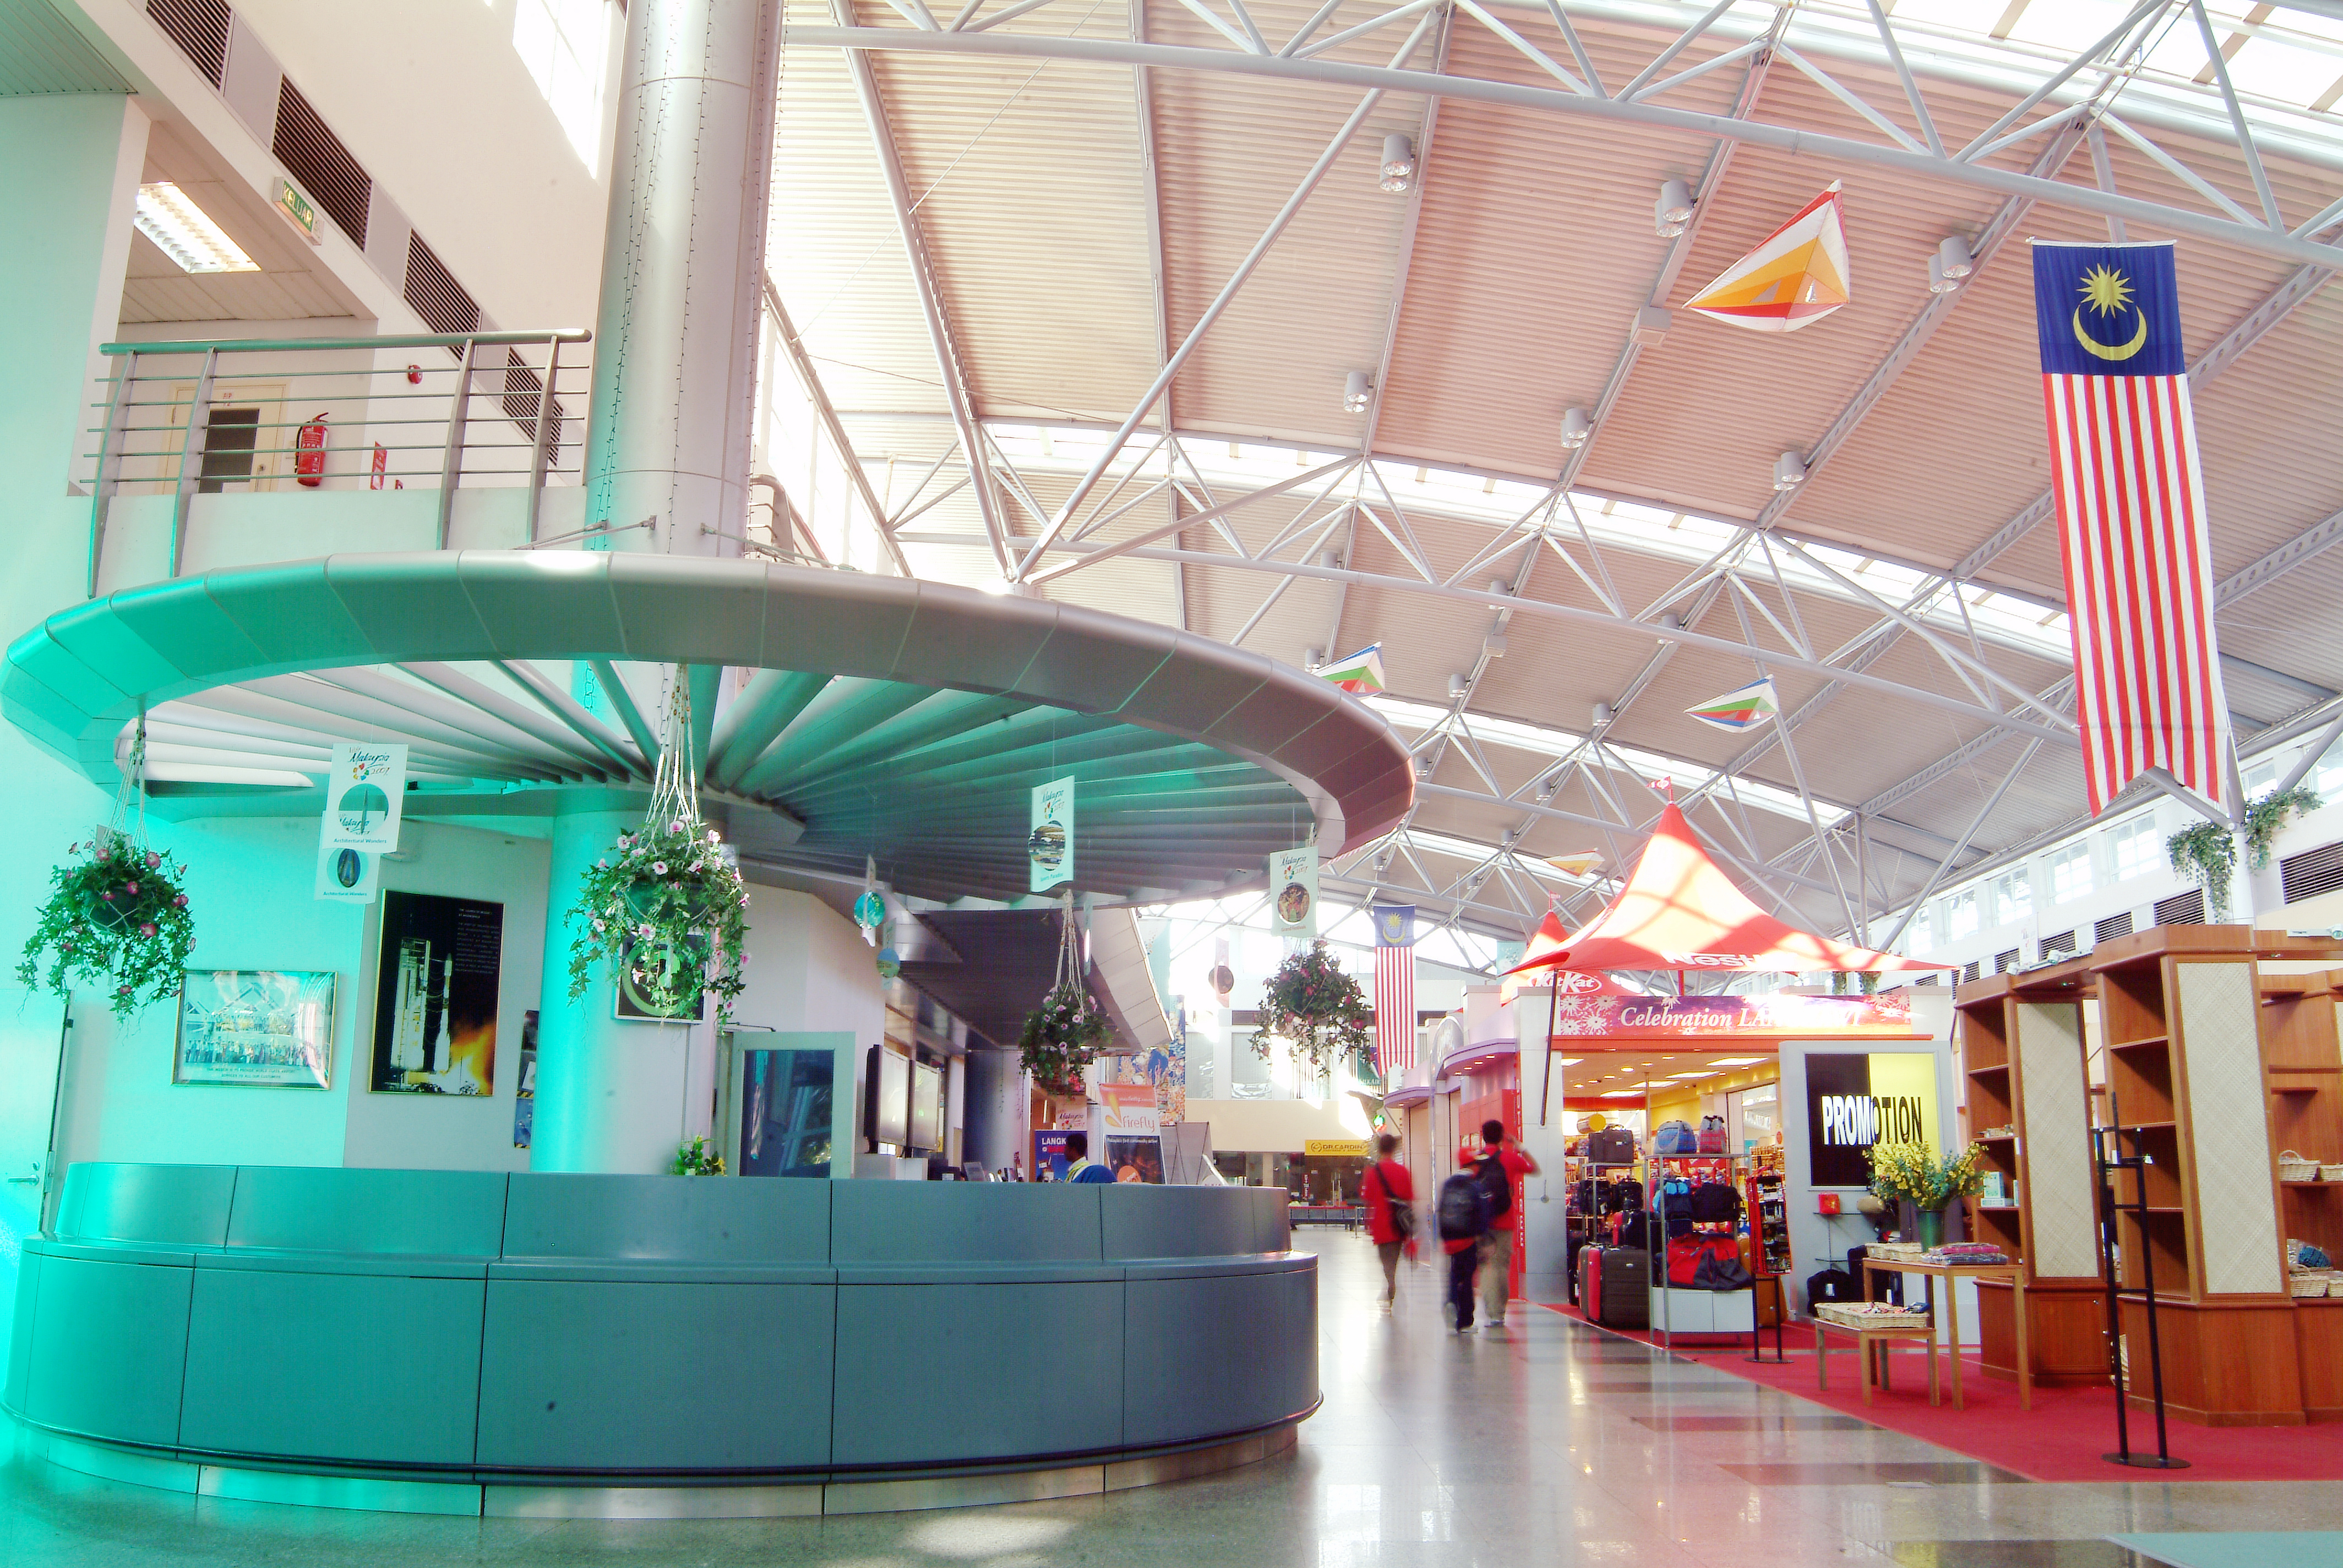 Extension and Renovation of Langkawi International Airport Terminal Building